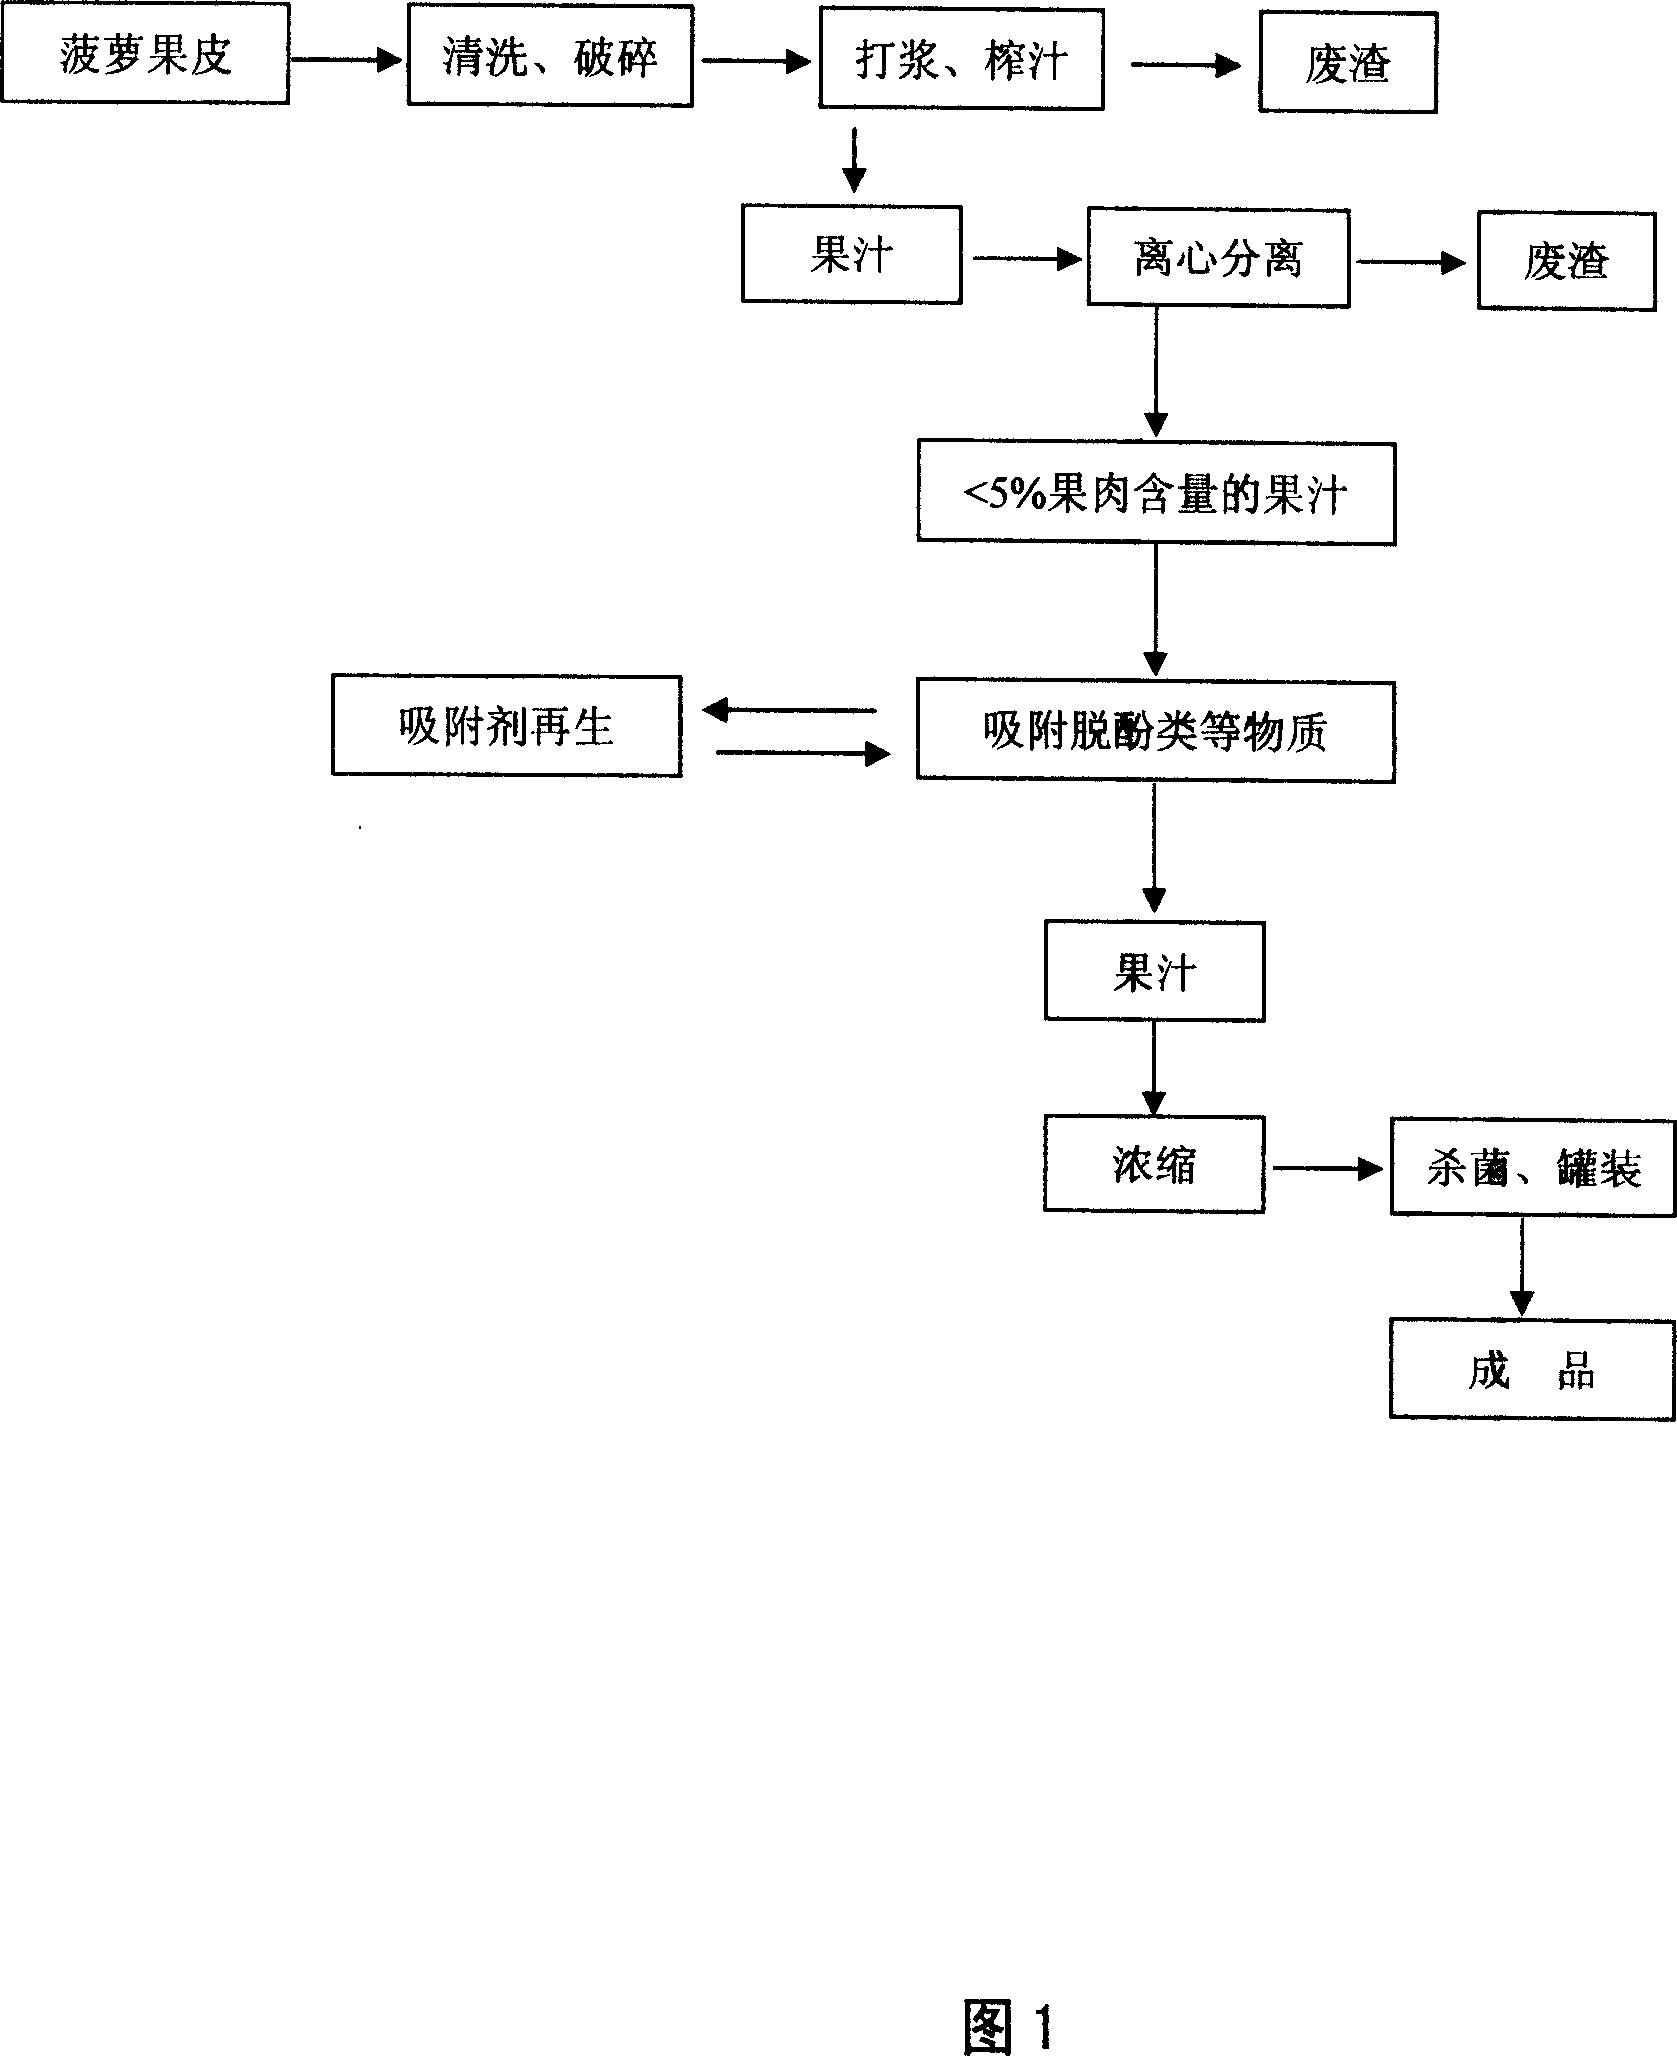 Production method for decreasing brown change of pineapple concentrated juice